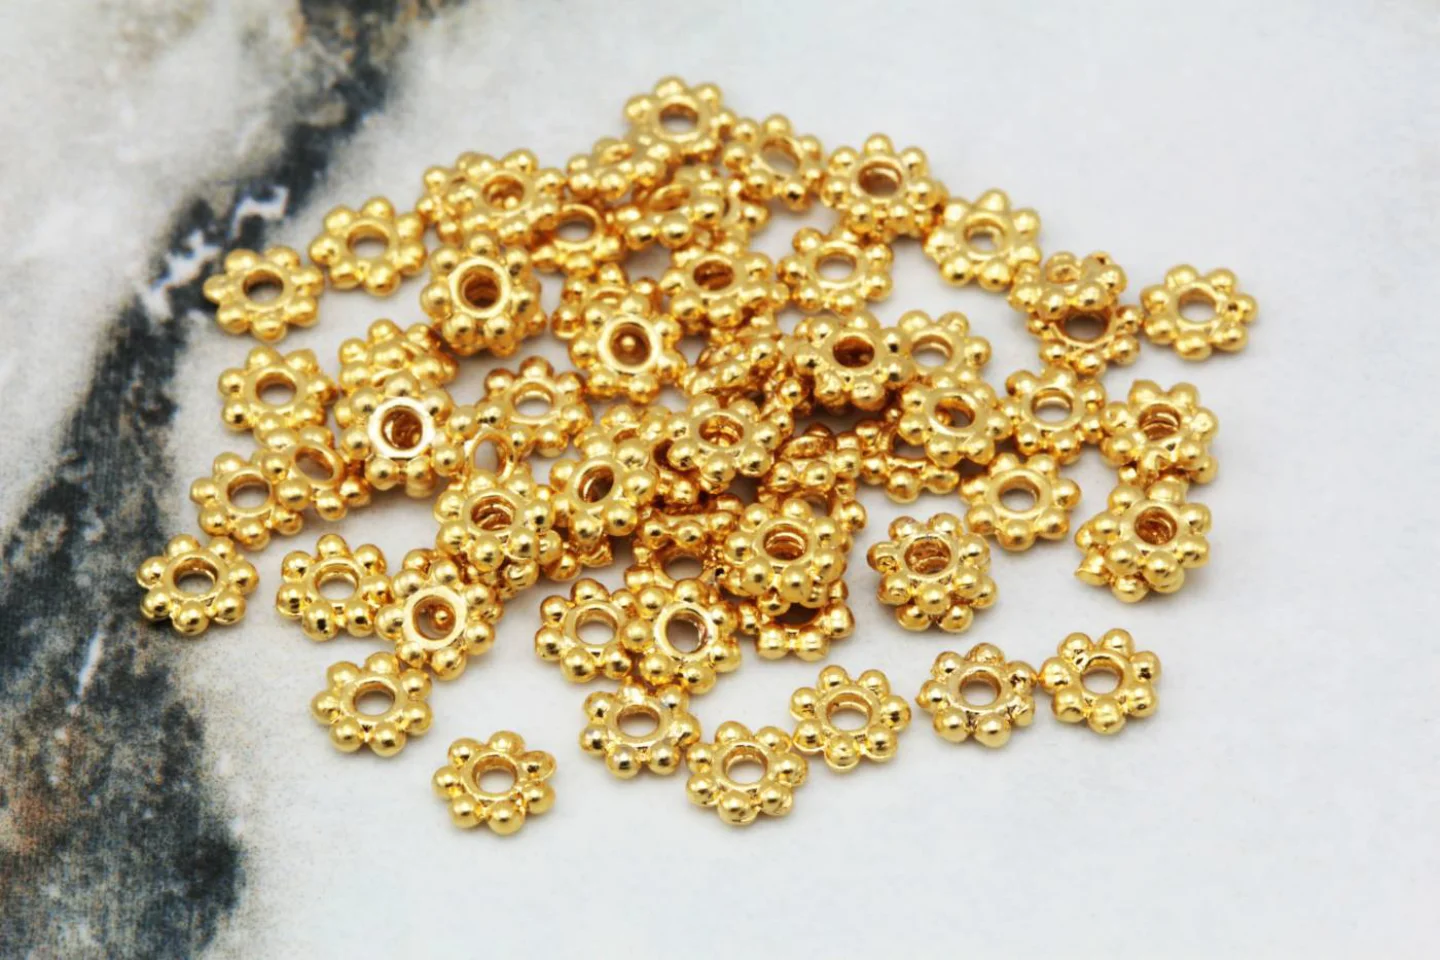 4mm-gold-plate-mini-rondelle-spacer-bead.